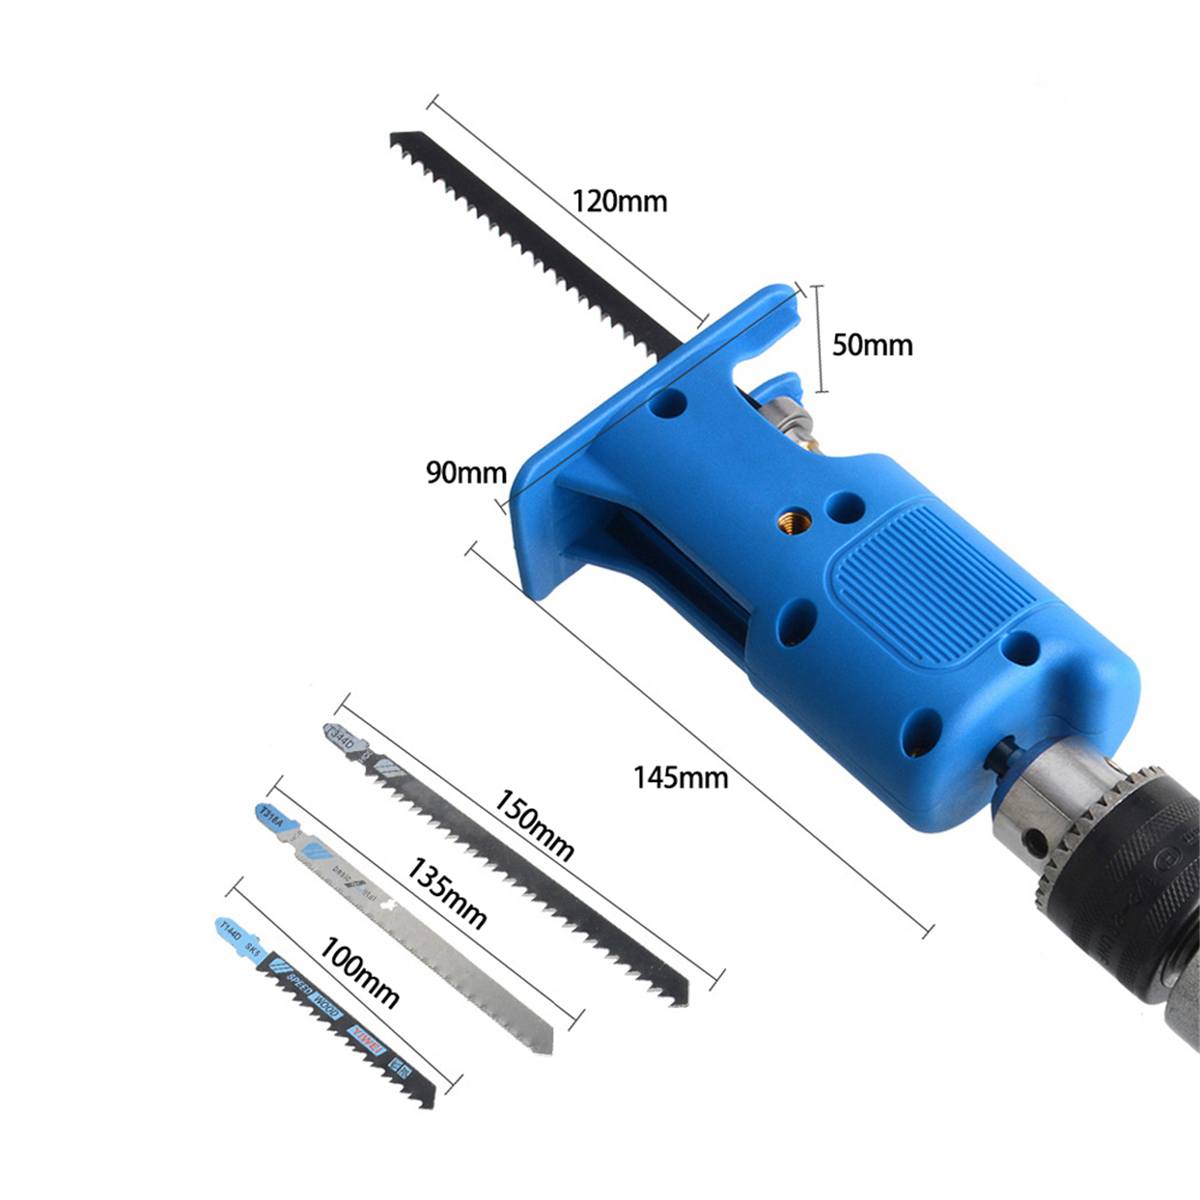 Cordless Reciprocating Saw Adapter Electric Drill Modified Electric Saw Power Tool Attachment Adapter For Wood Metal Cutter Saw